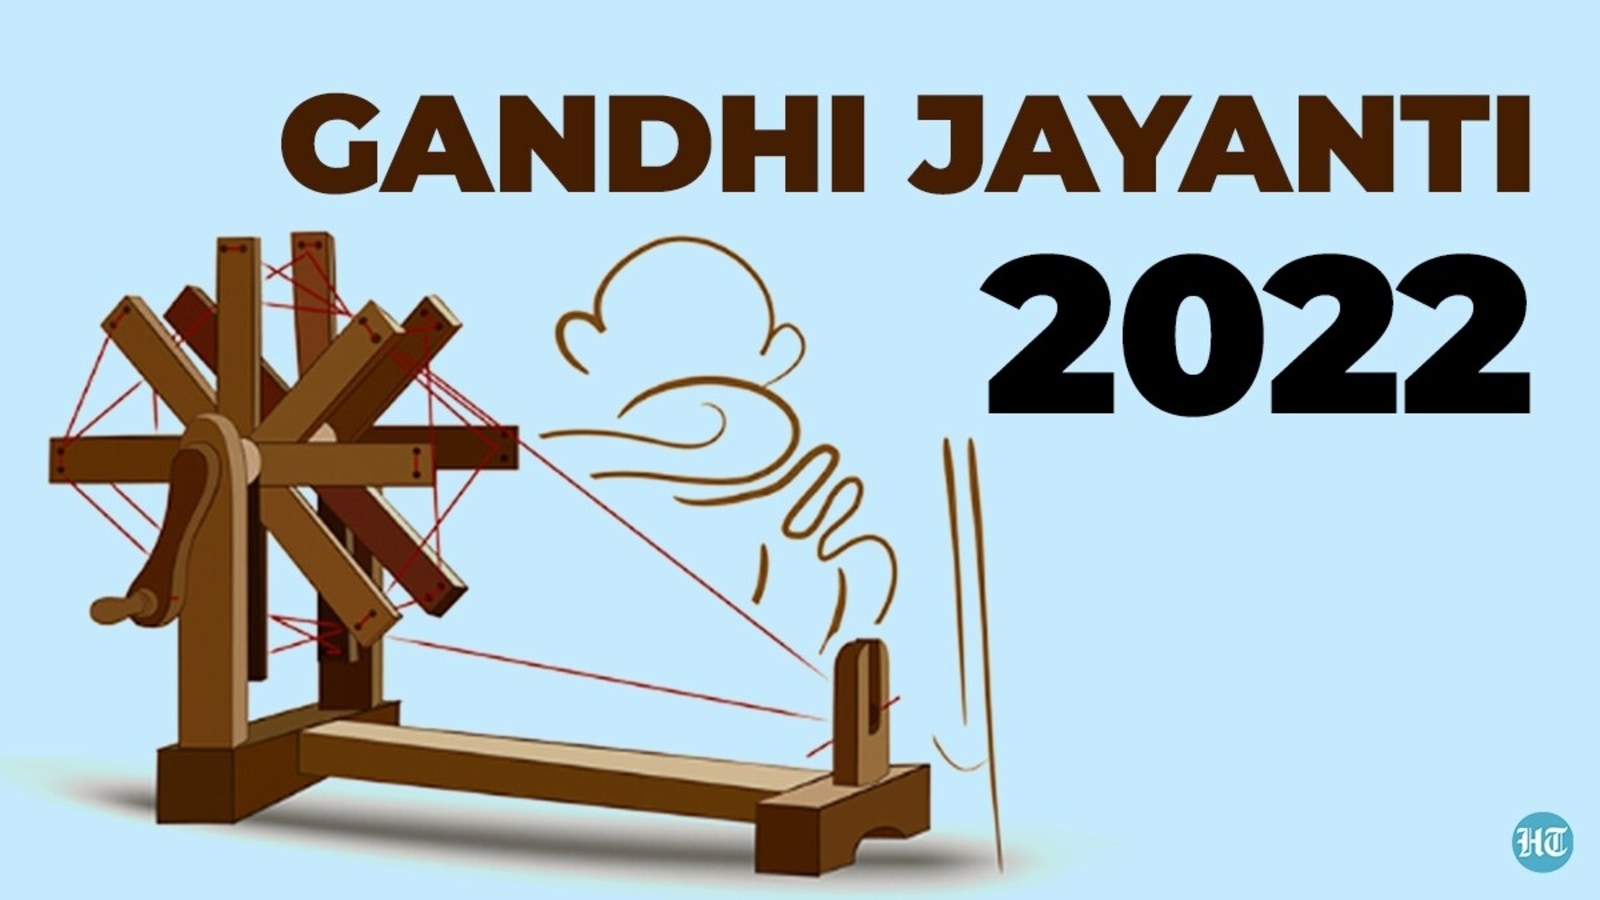 gandhi-jayanti-2022-wishes-images-inspiring-quotes-by-mahatma-gandhi-and-messages-to-share-on-october-2